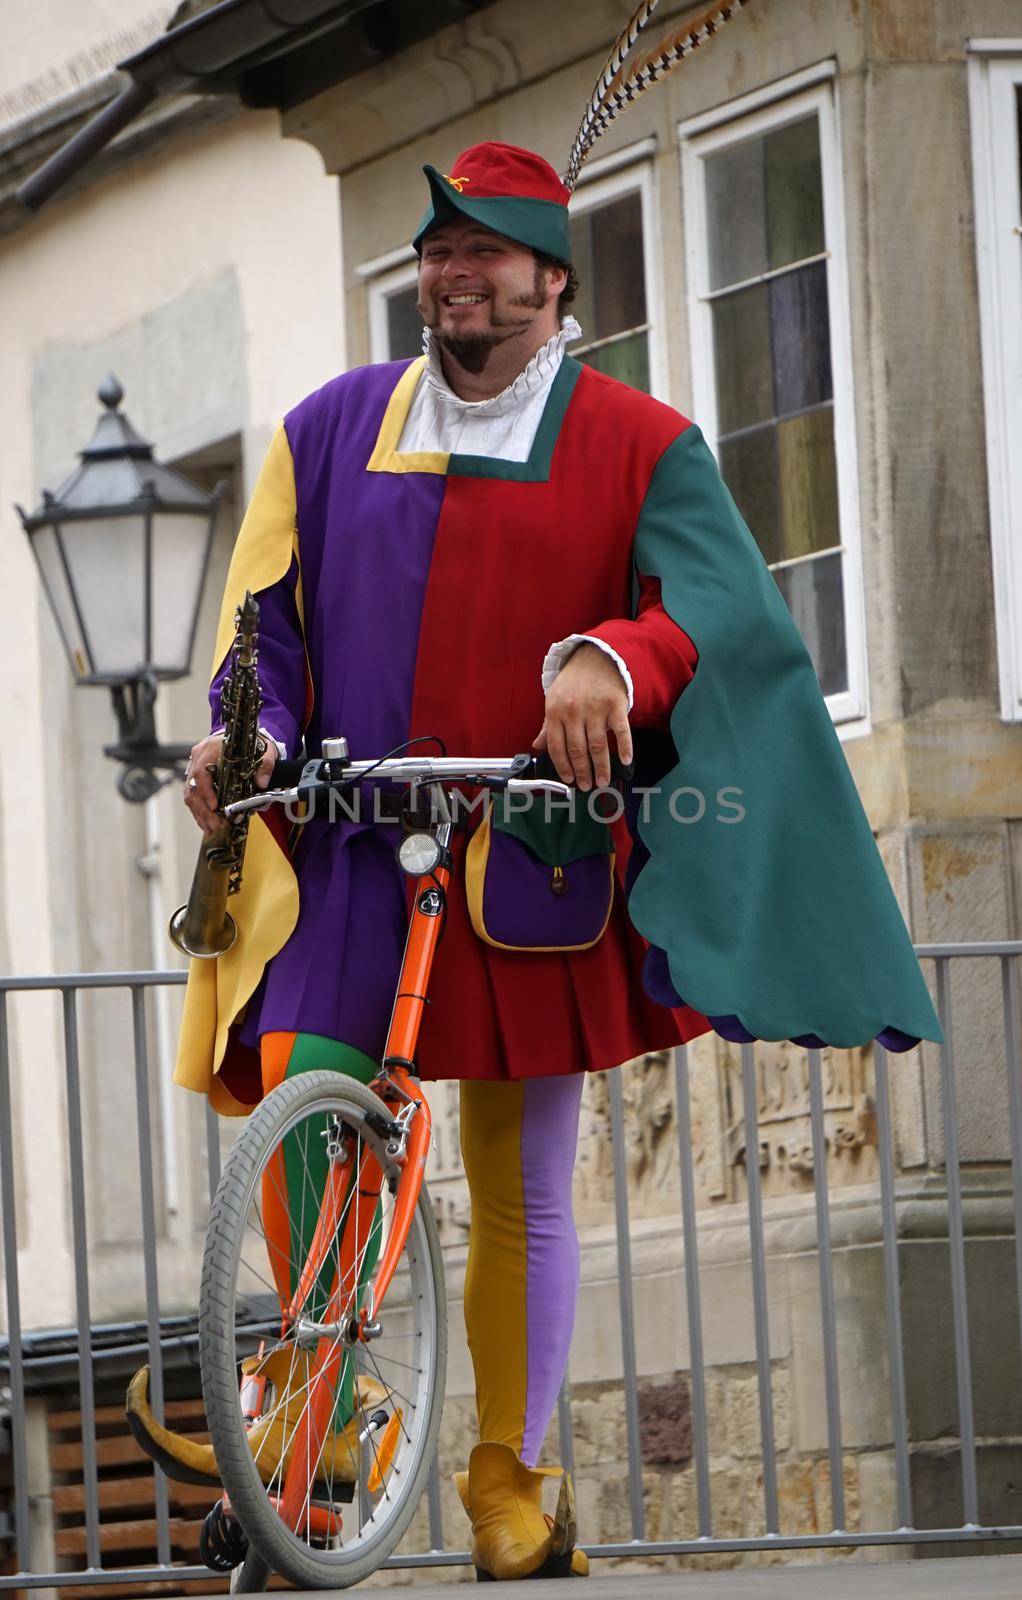 Hamelin, Germany - July 16 2017 The Pied Piper of Hamelin, dressed in multicolored clothes, rides a scooter with a clarinet in his hand through Hamelin for the tourists